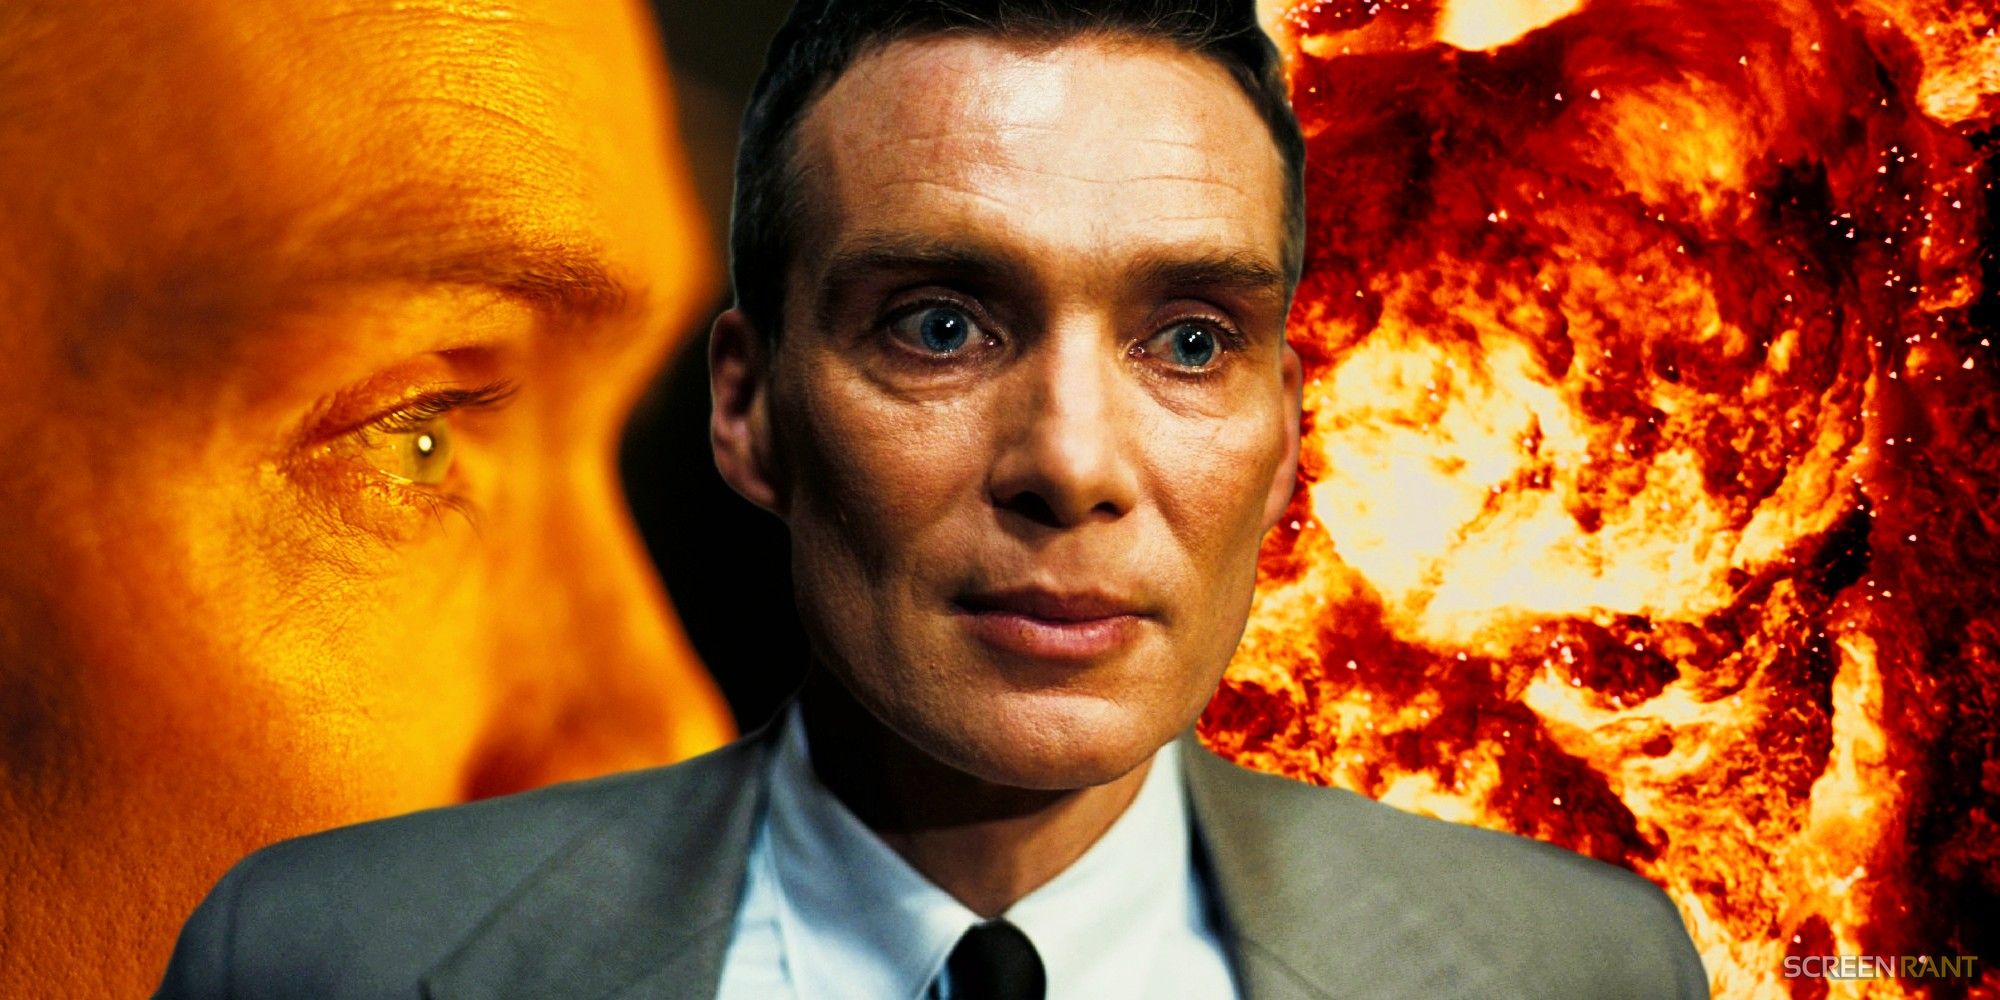 Cillian Murphy as J. Robert Oppenheimer watching the Trinity Test and the atomic bomb explosion in Oppenheimer